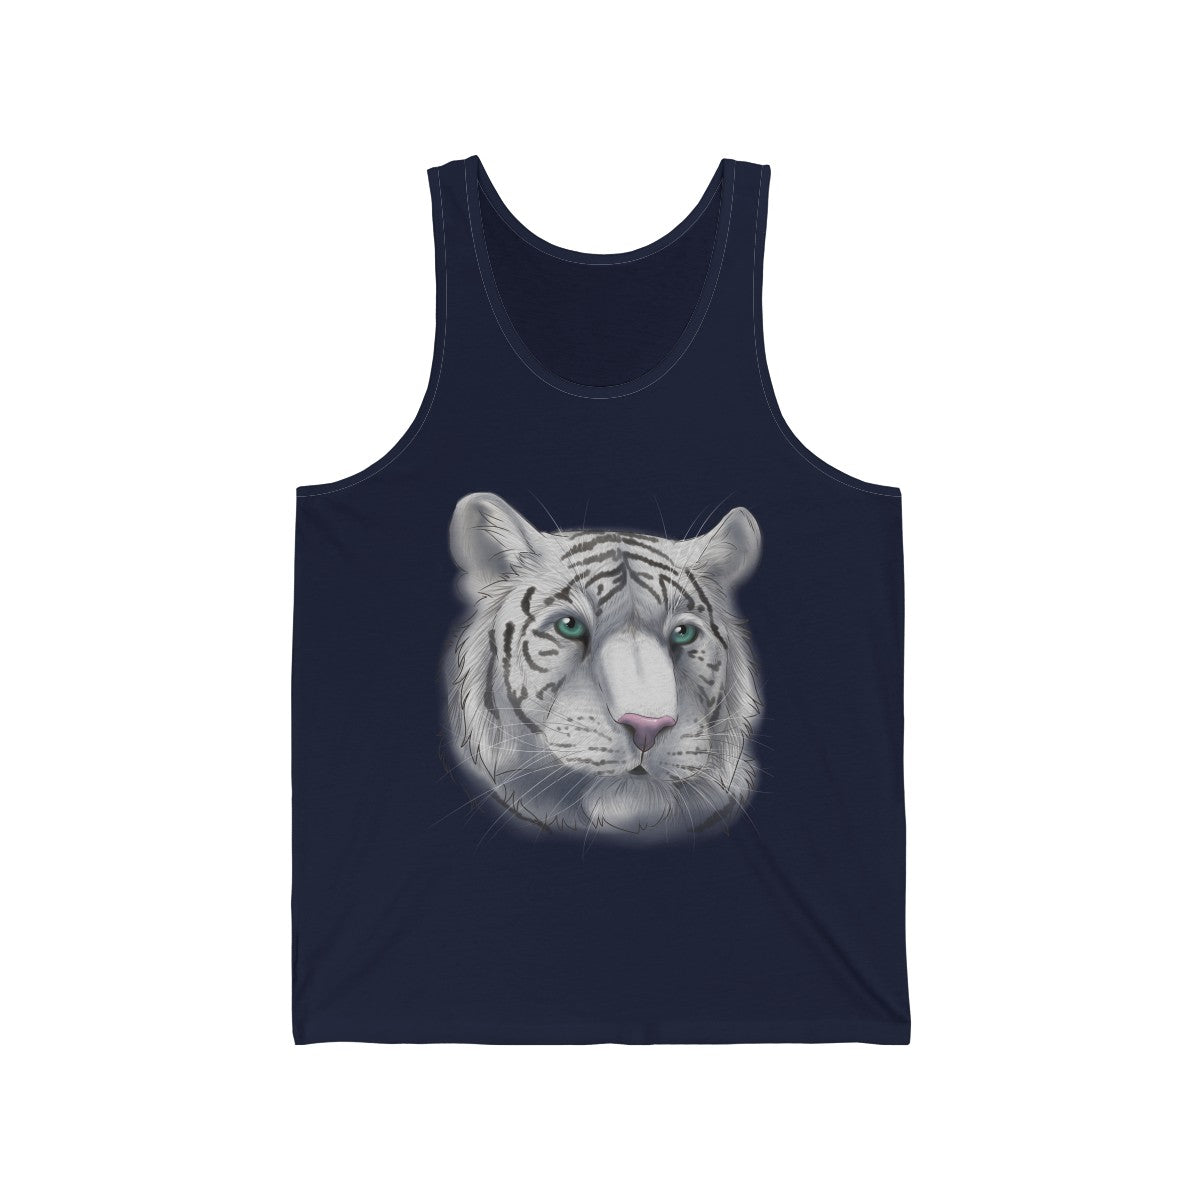 White Tiger - Tank Top Tank Top Dire Creatures Navy Blue XS 